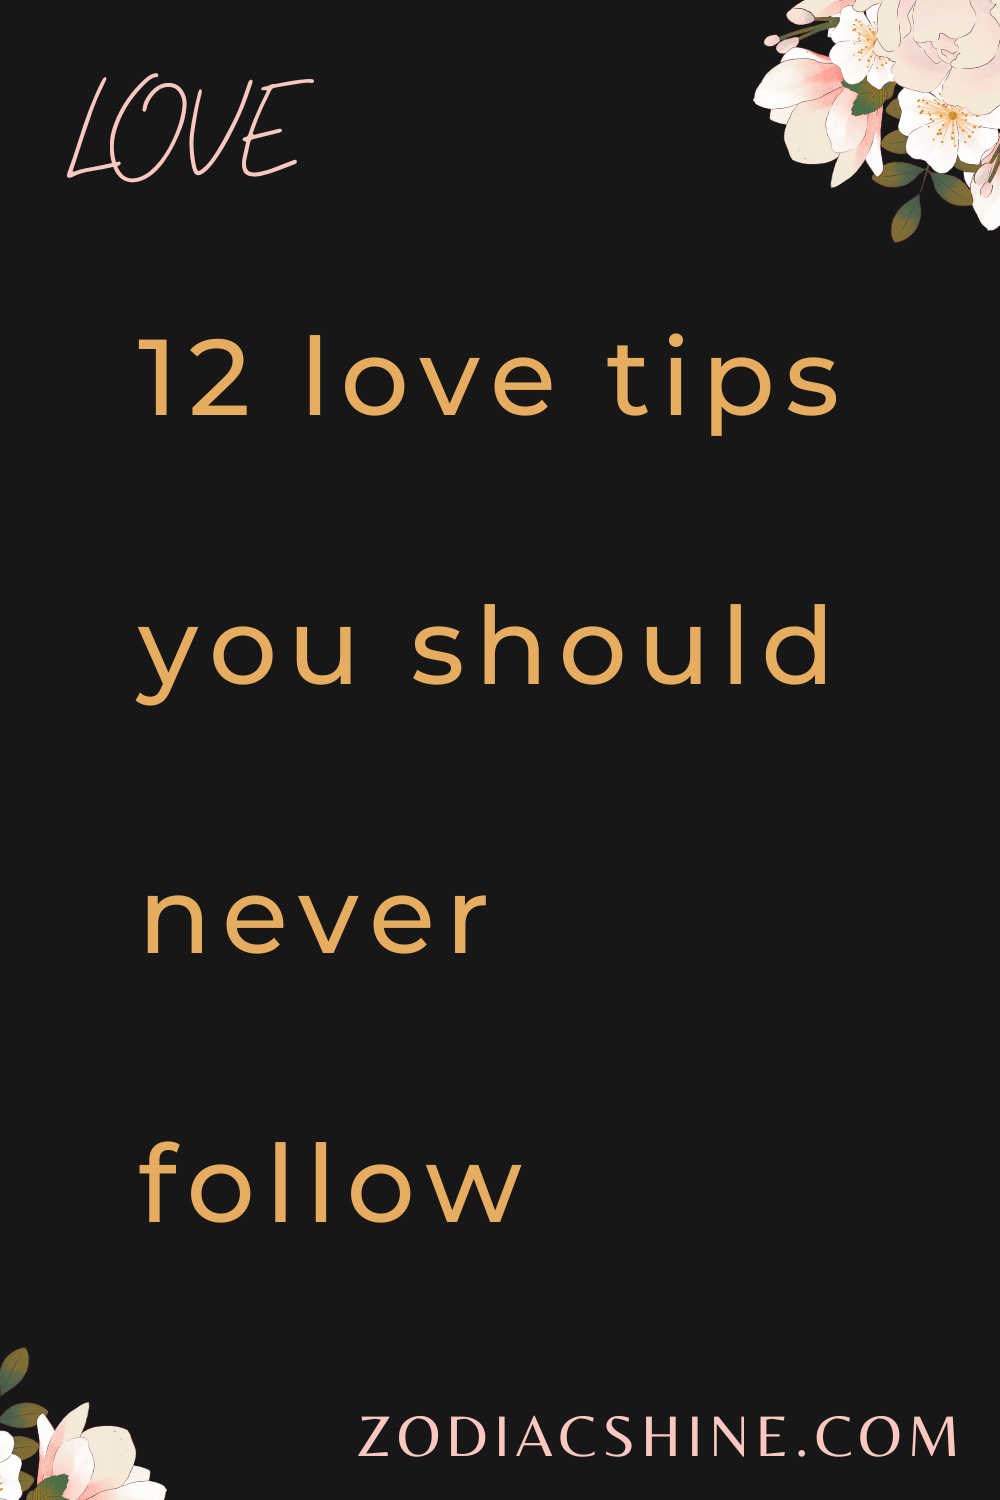 12 love tips you should never follow